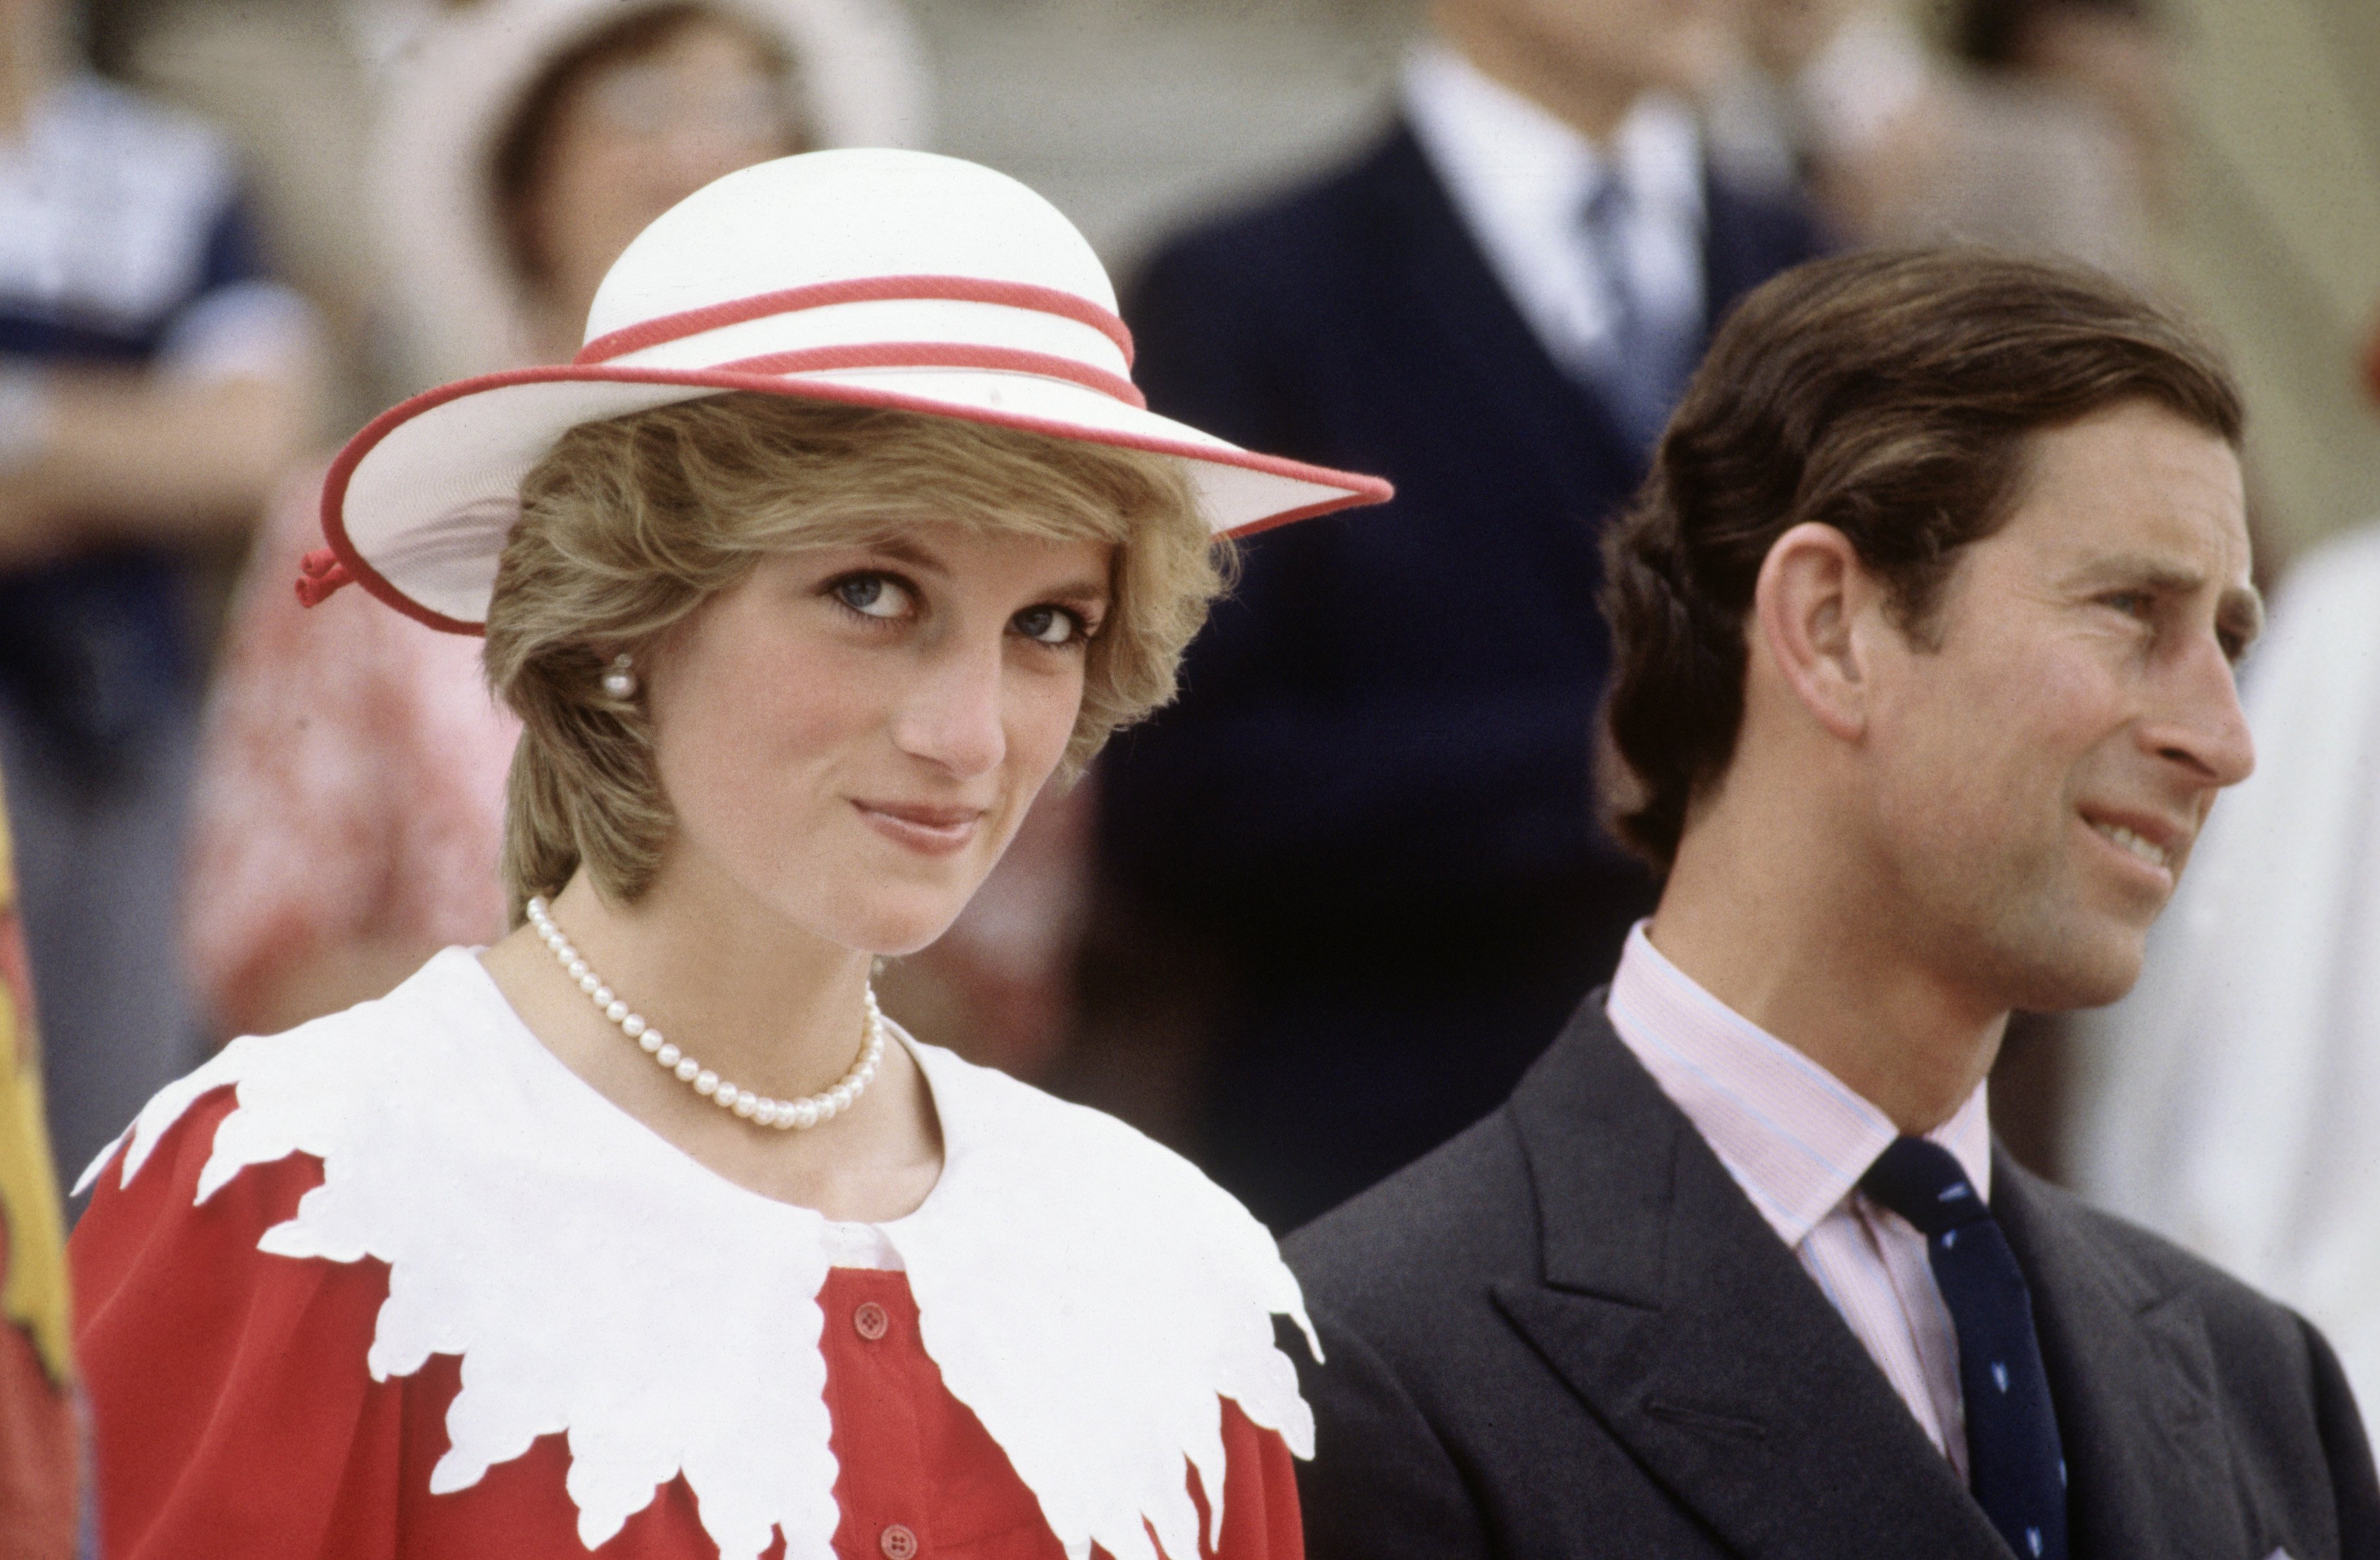 Diana Princess of Wales and Prince Charles during the Royal Tour of Canada on June 29, 1983. | Photo: GettyImages